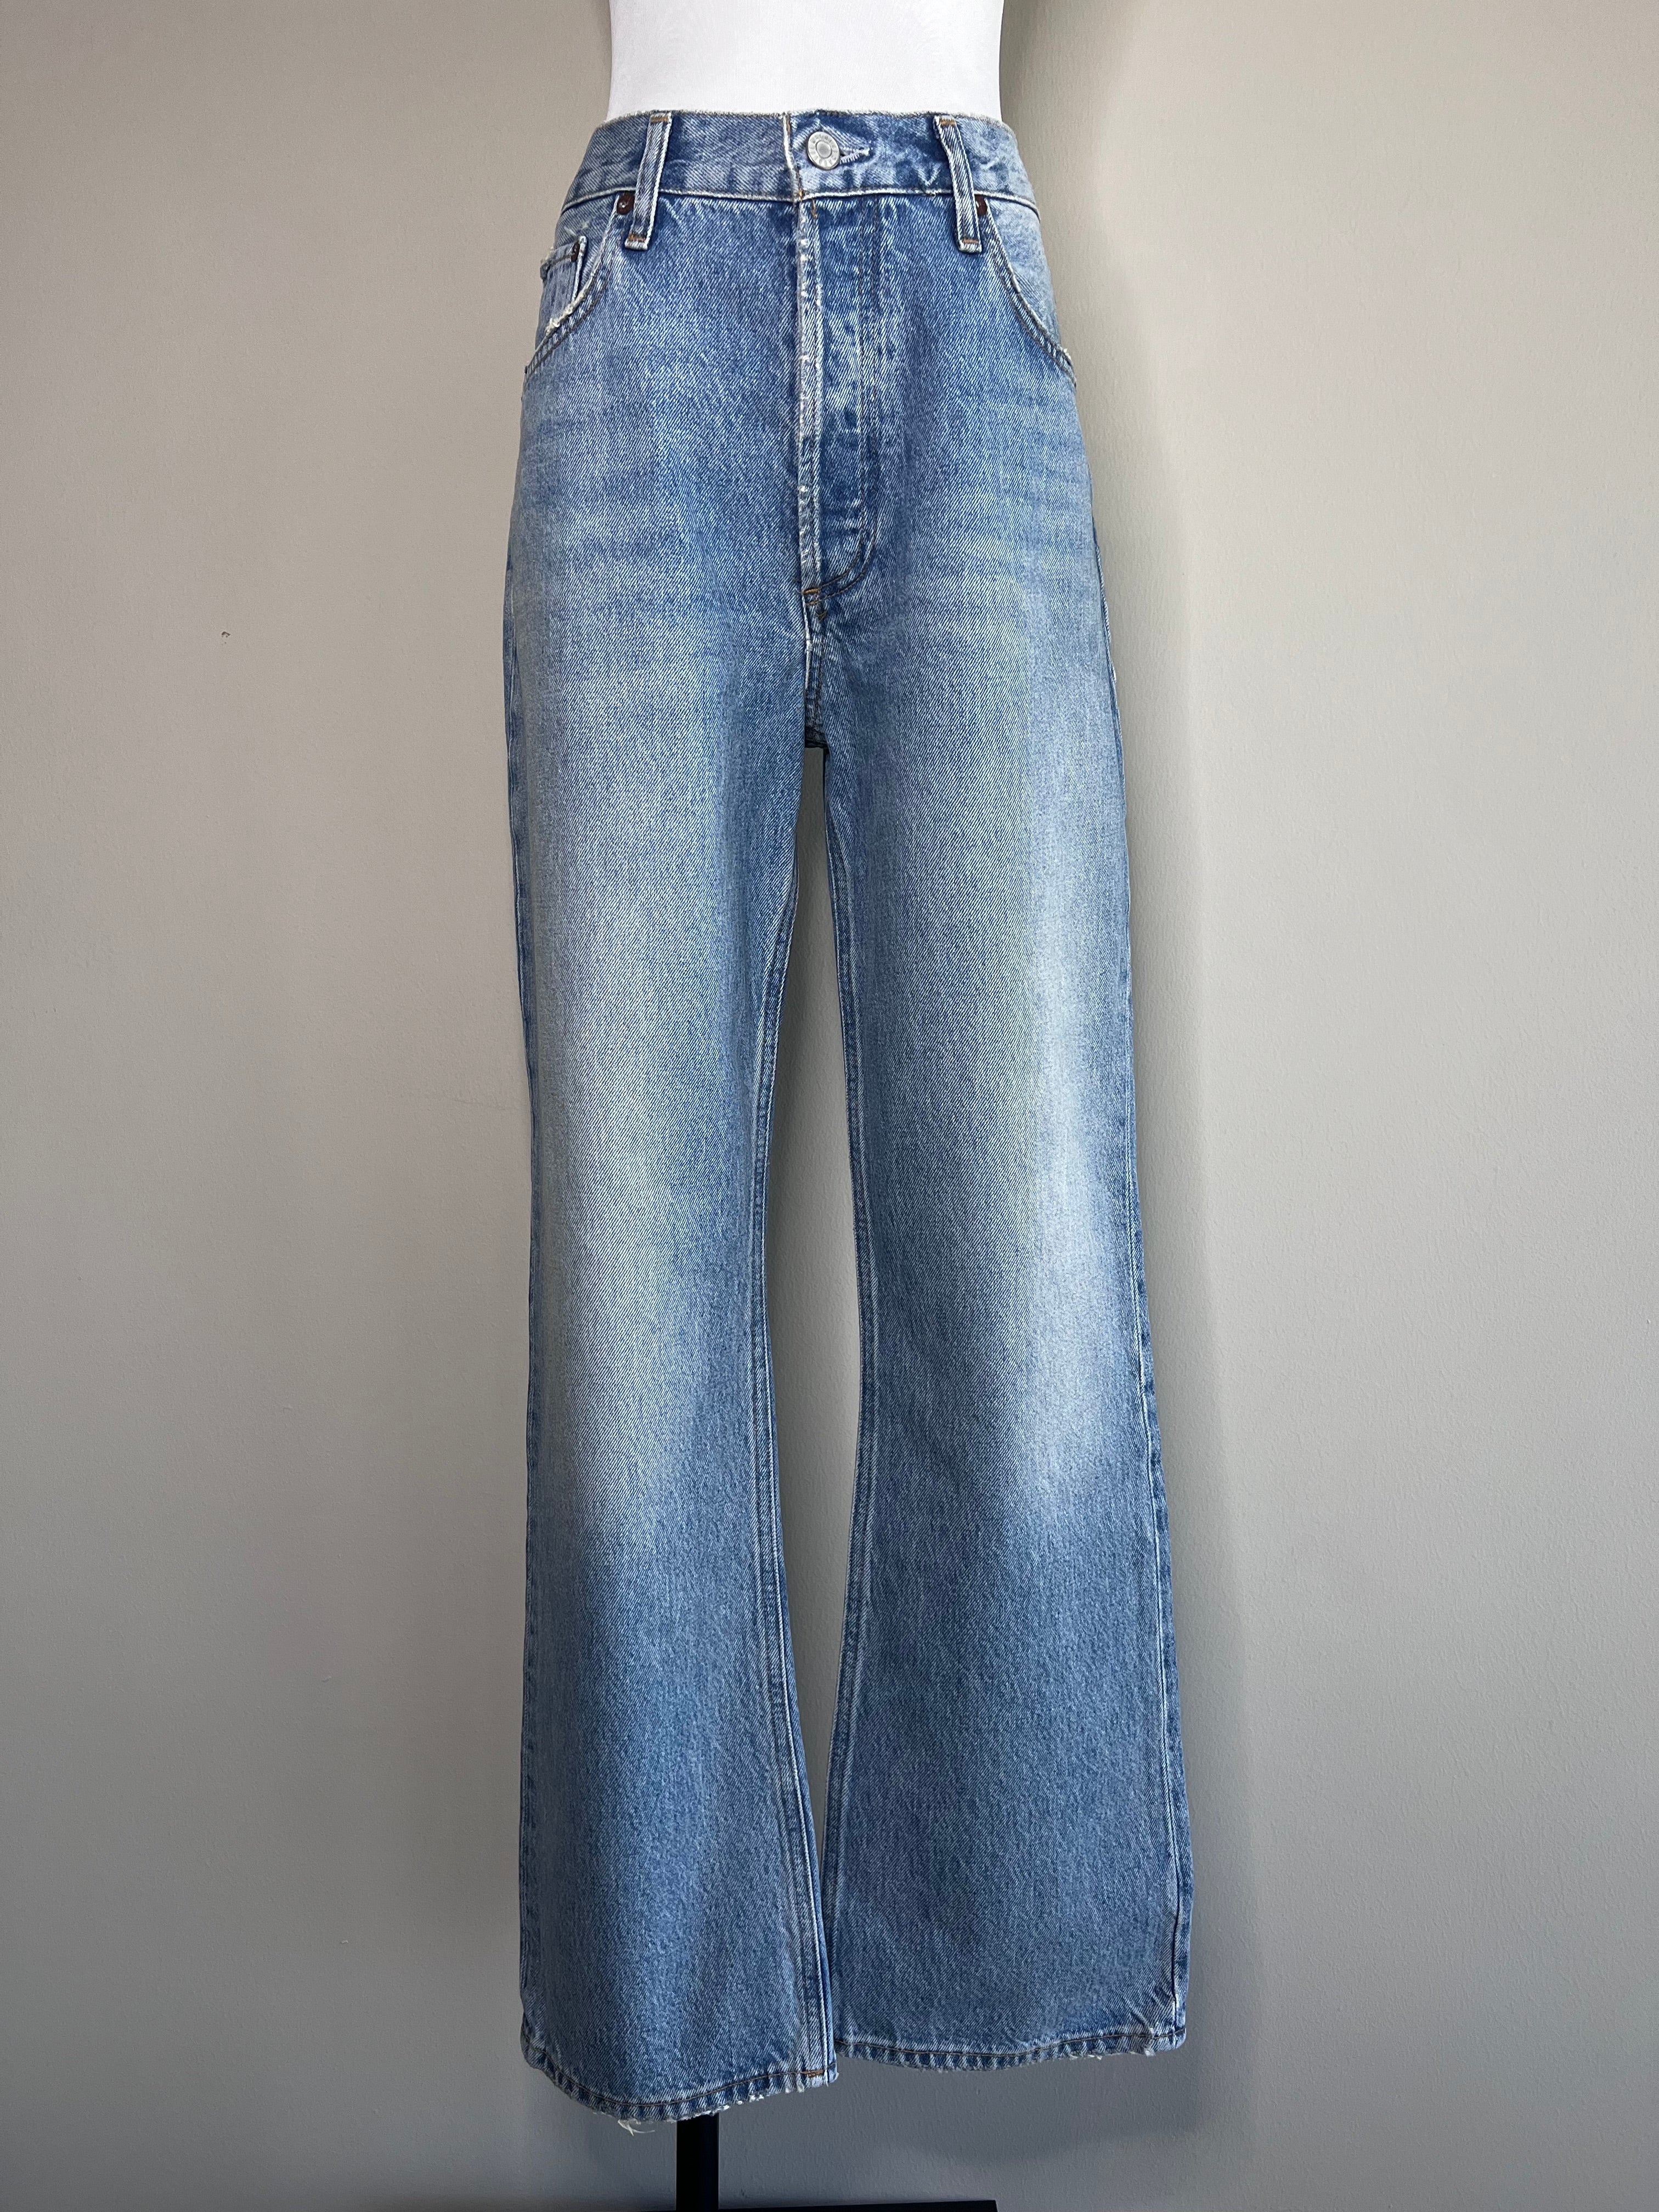 BRAND NEW! Blue relaxed boot mid-rise jeans - AGOLDE